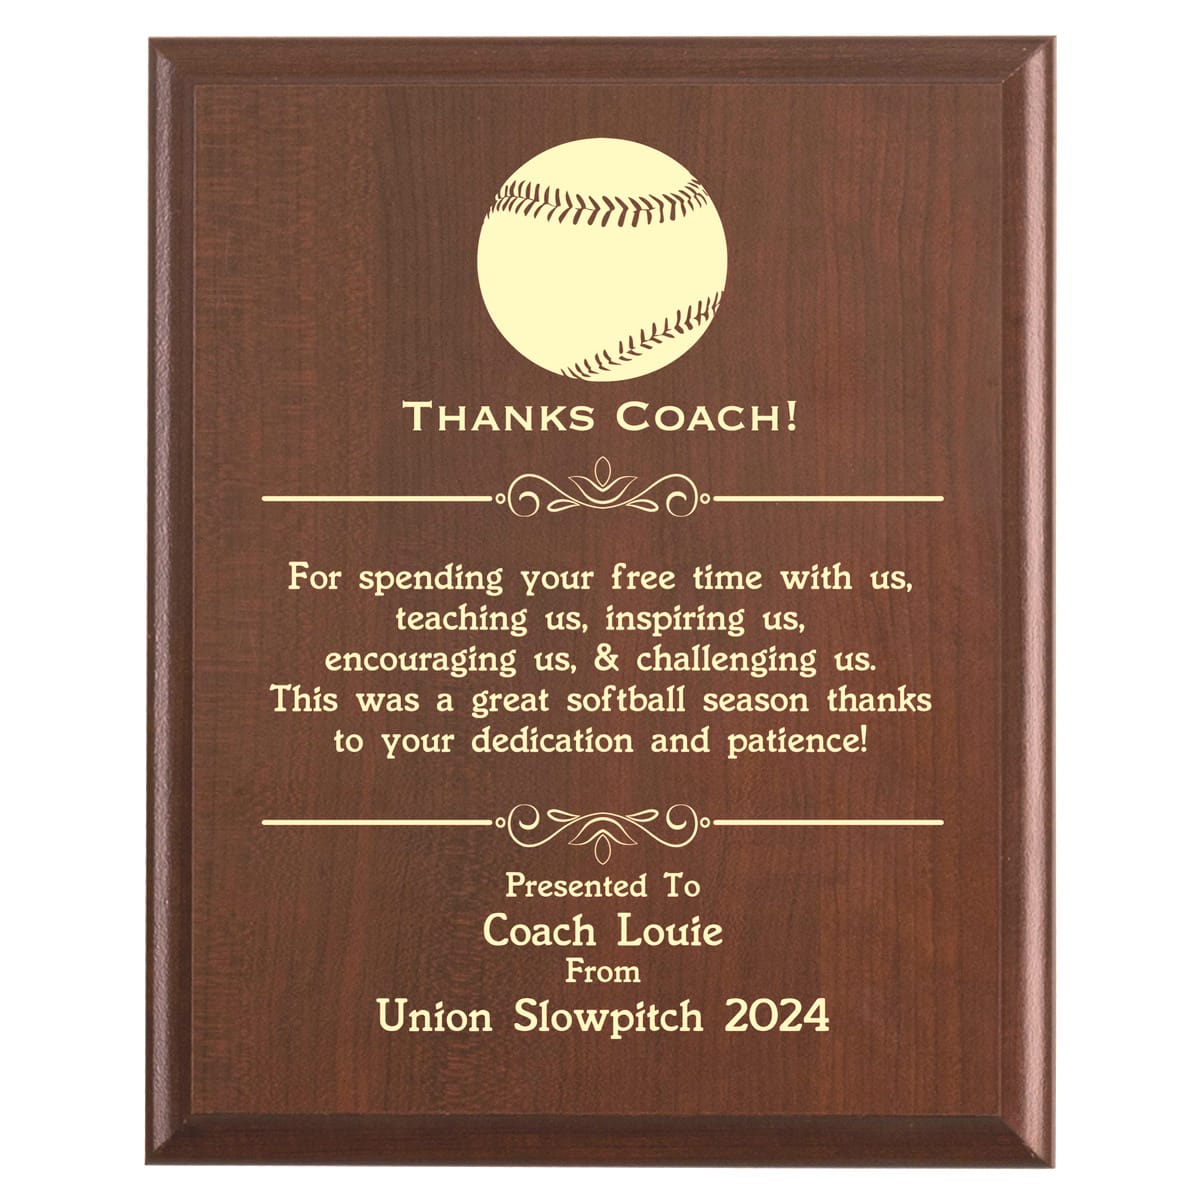 Plaque photo: Softball Coach Thank You Gift design with free personalization. Wood style finish with customized text.